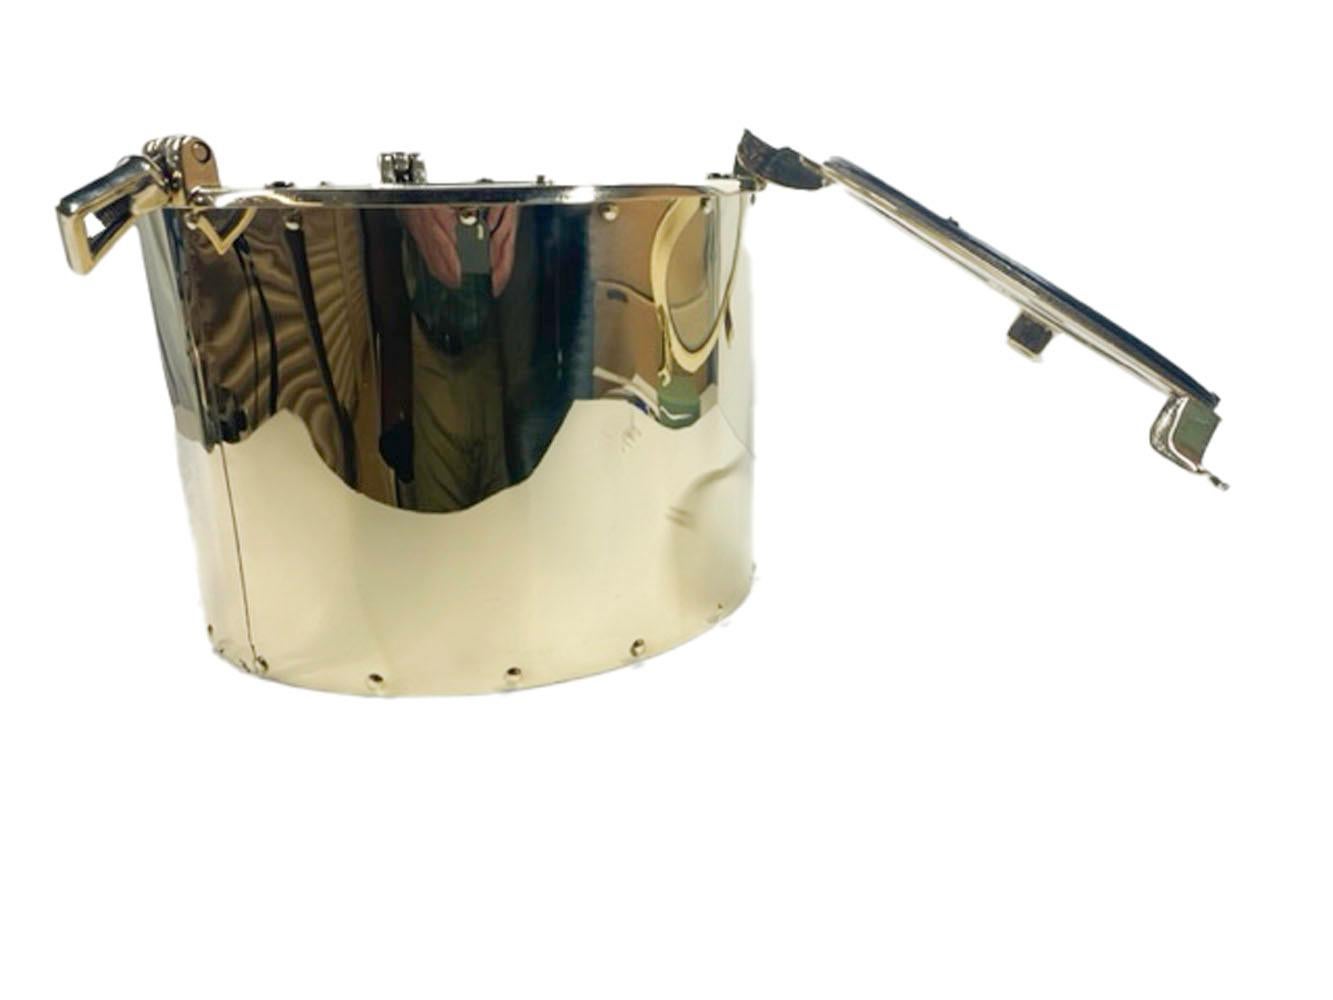 Vintage brass ice bucket of cylindrical form with a hinged ship's porthole cover, having a glass window and working screw latches enclosing a removable zinc liner.